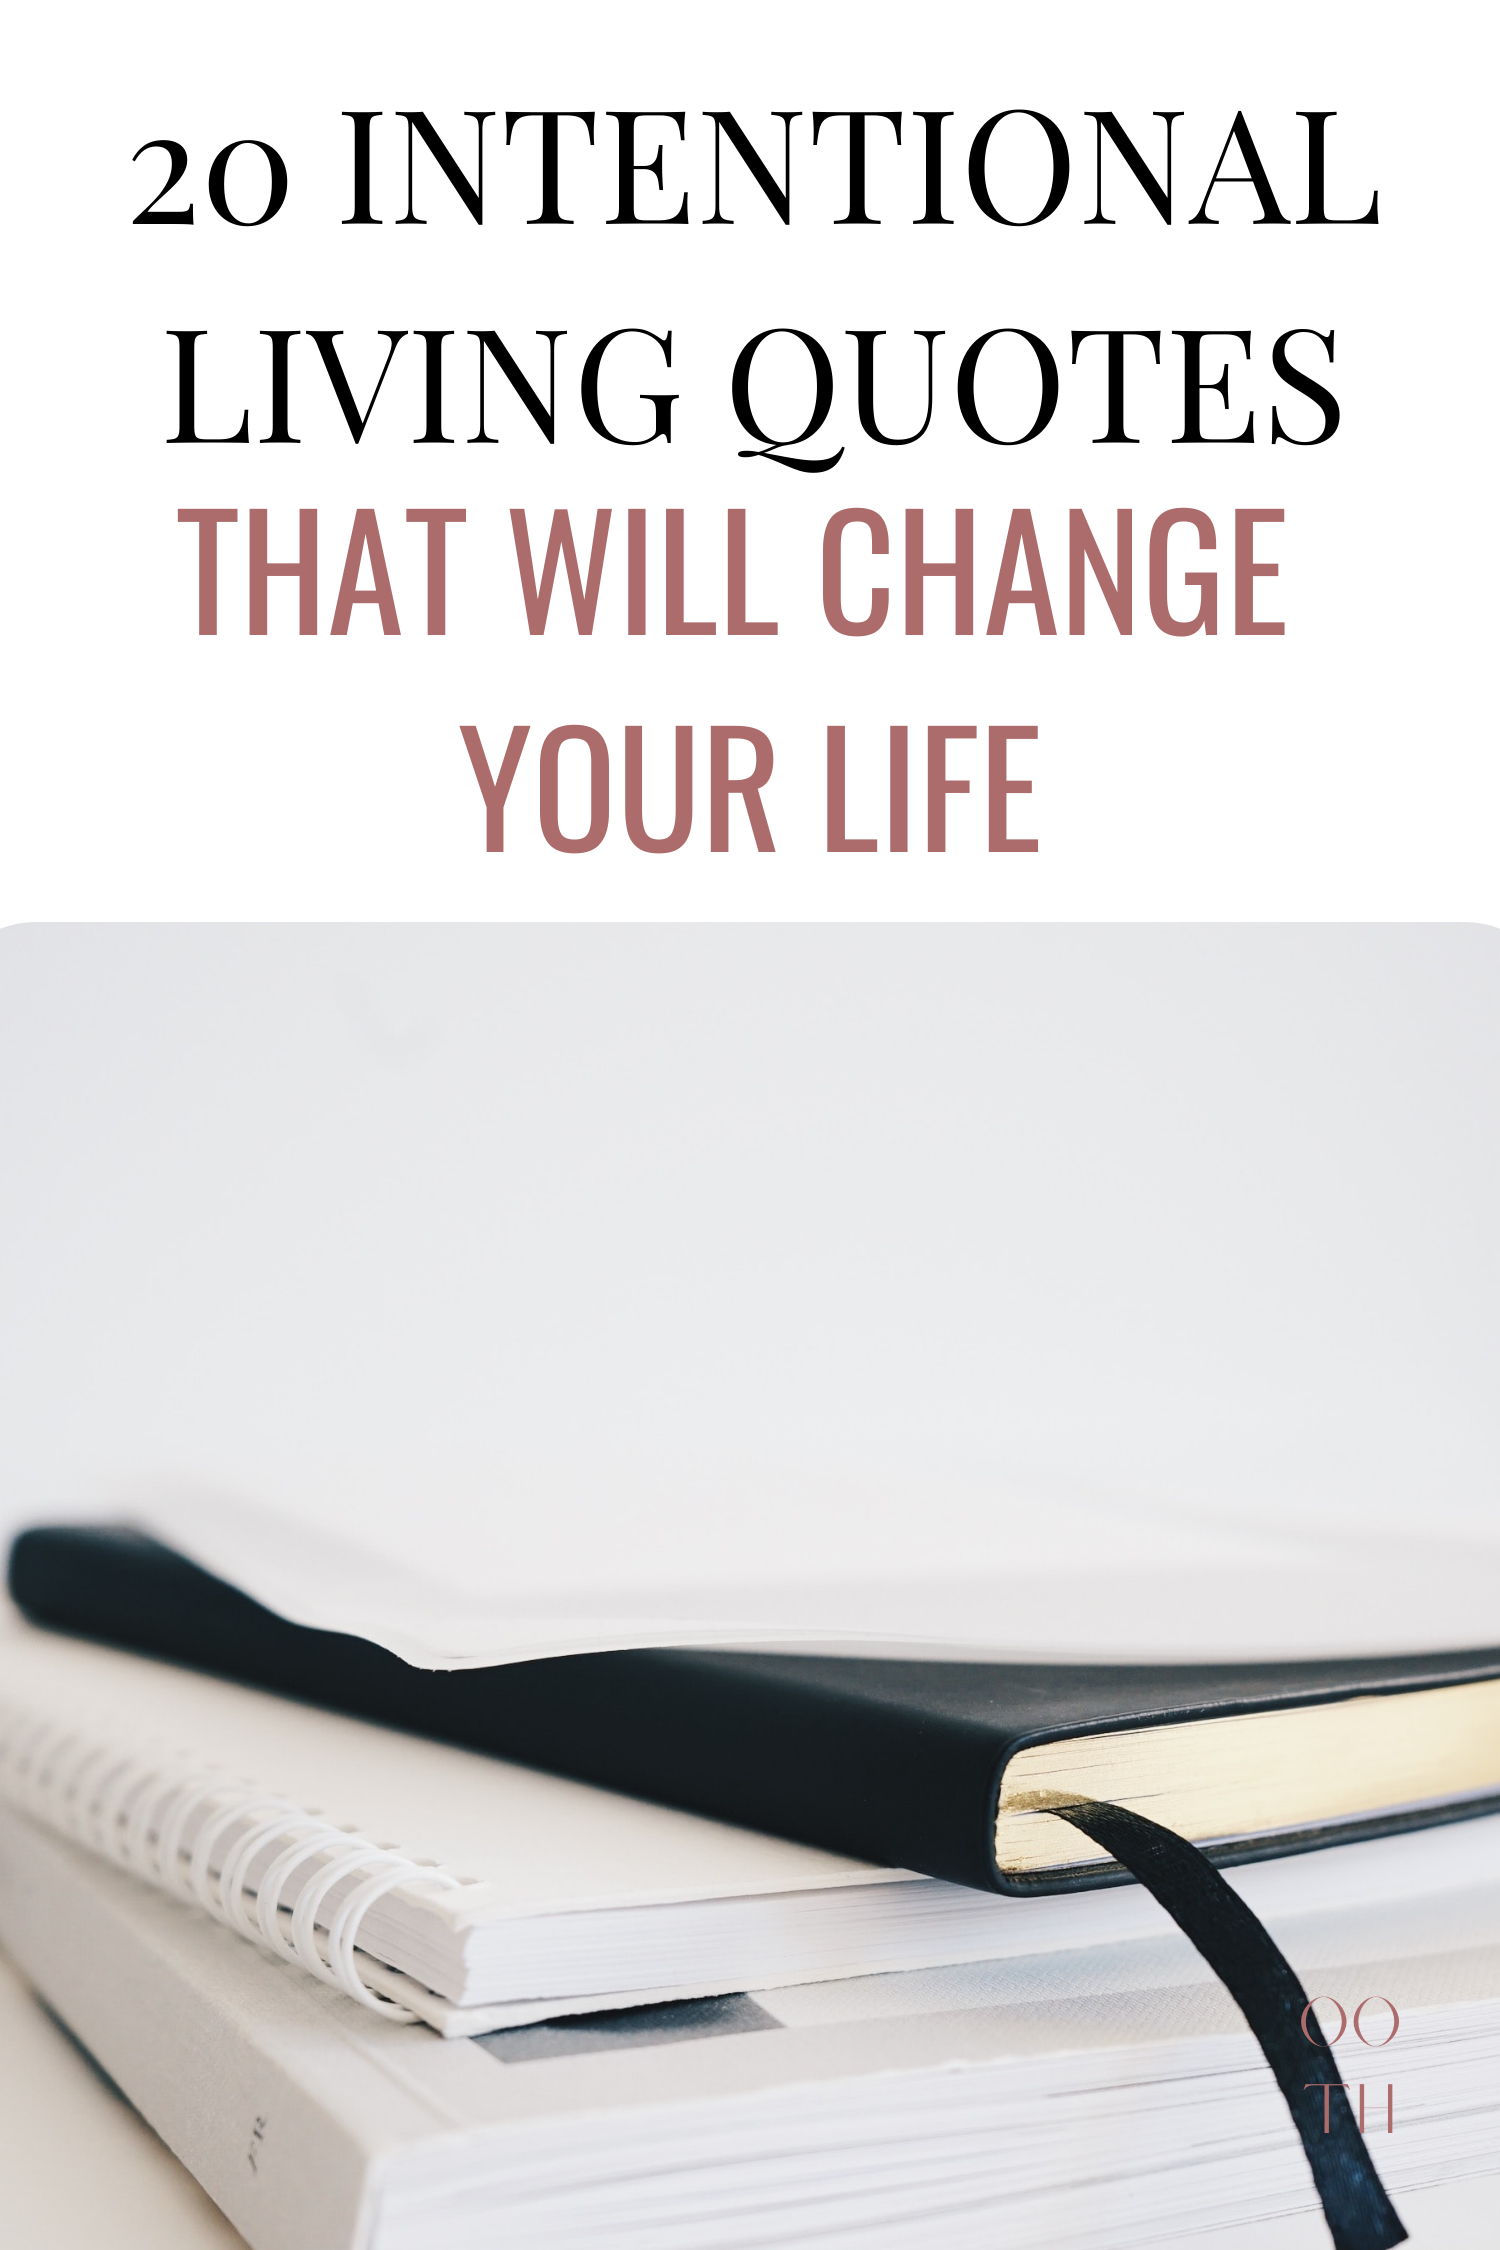 20 Intentional Living Quotes that Will Change Your Life - out of the habit